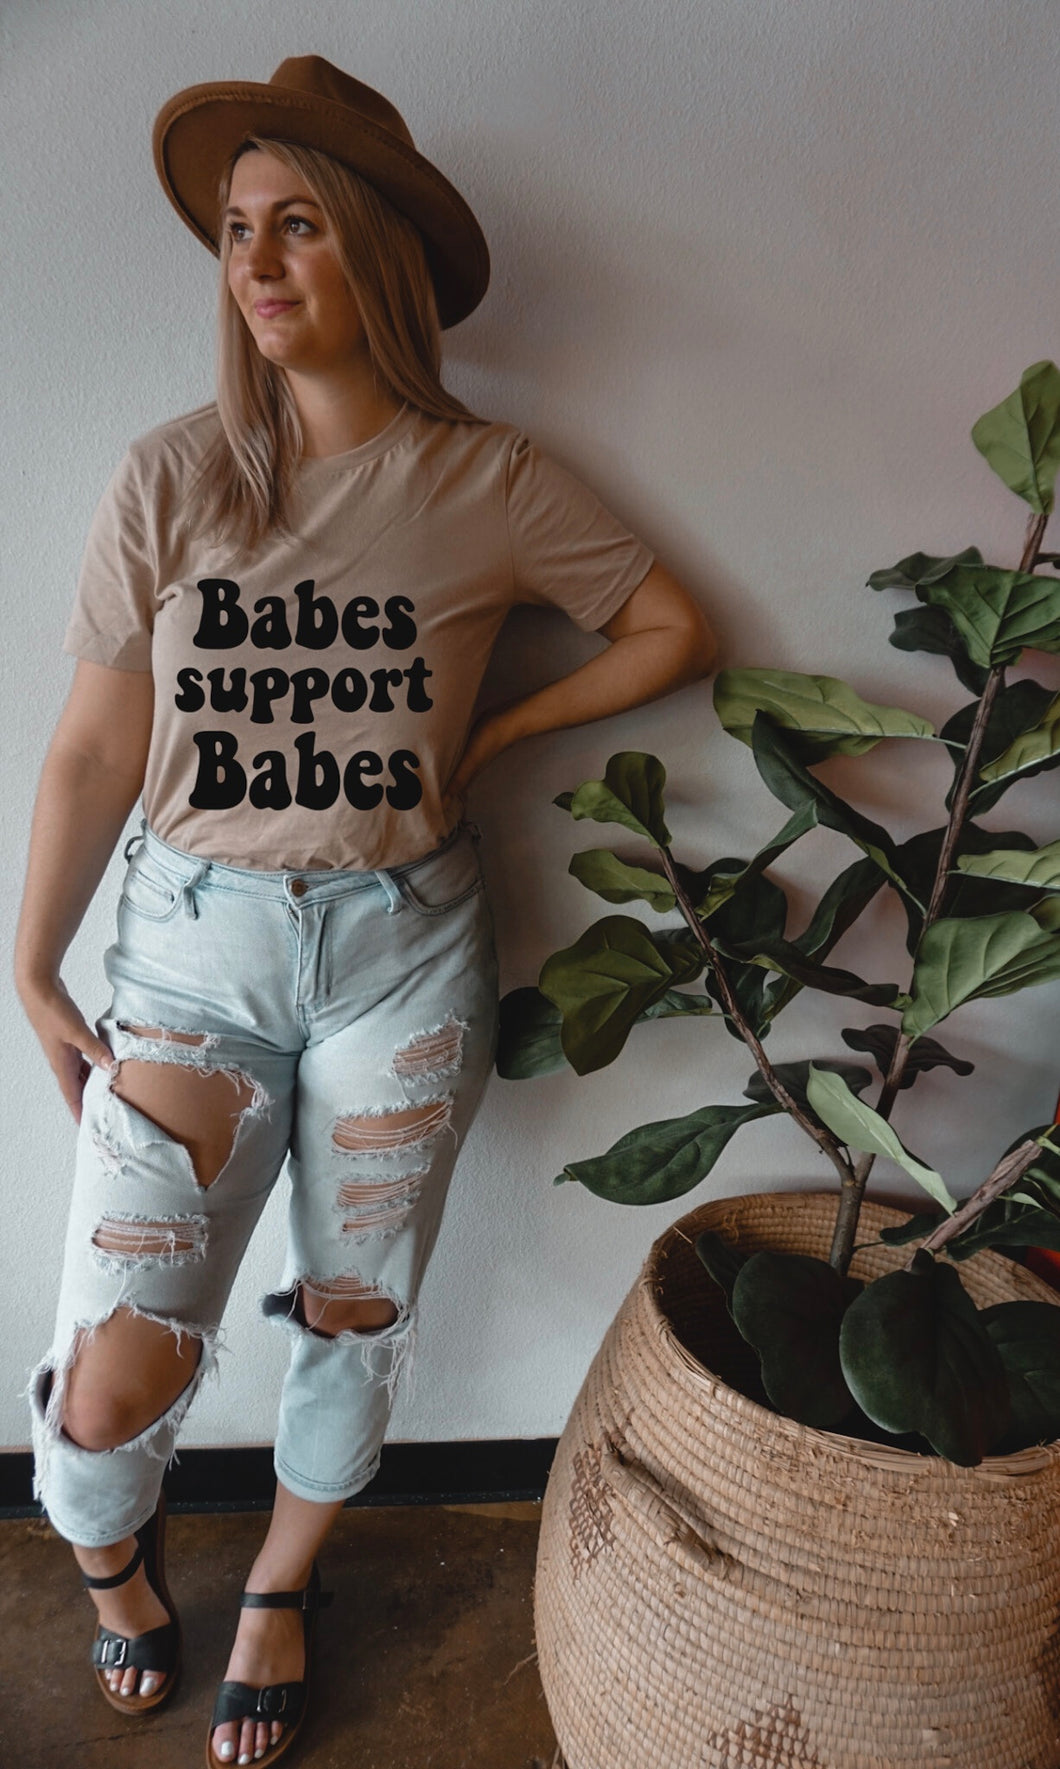 Babes Support Babes - Unisex Adult Tee